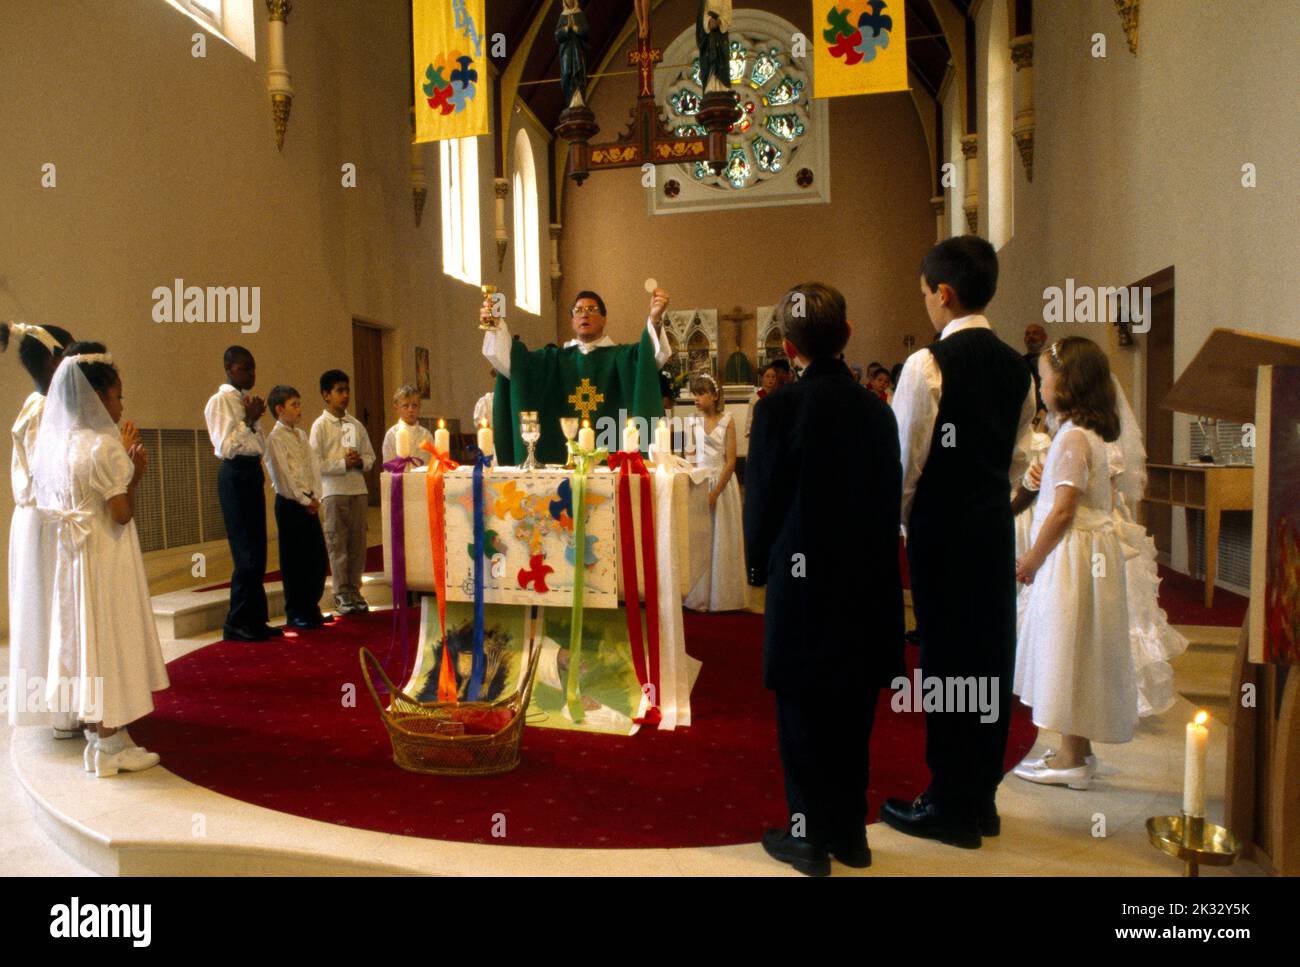 Priest at Altar performing the Eucharist at First Communion St Joseph's Church Roehampton London England Stock Photo